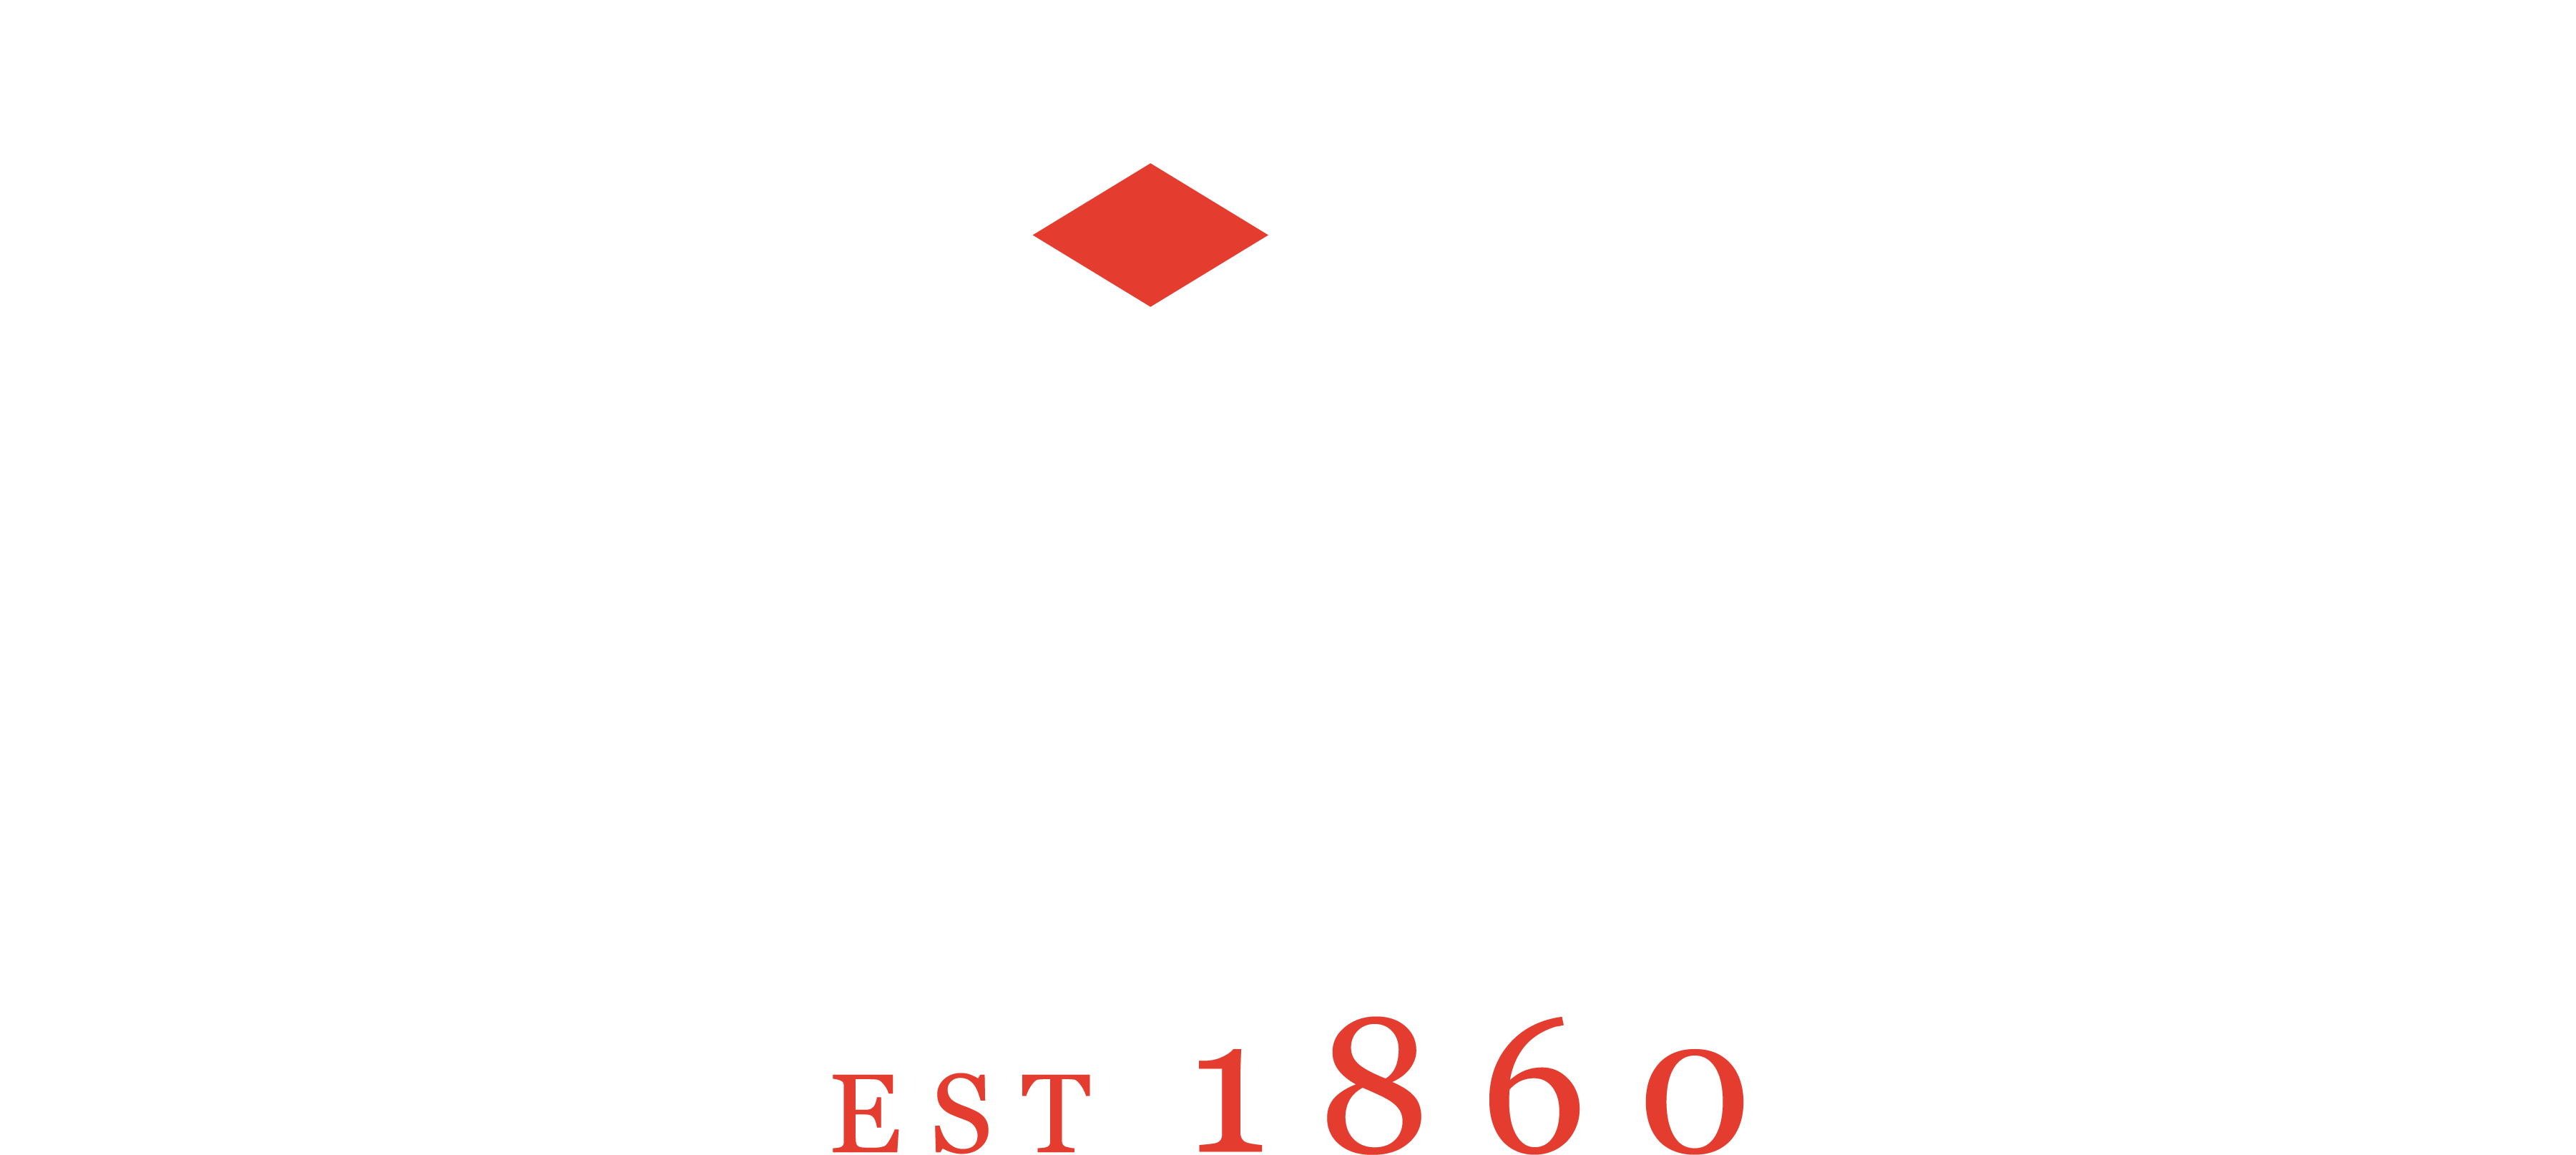 Lakeshore Yacht and Country Club logo